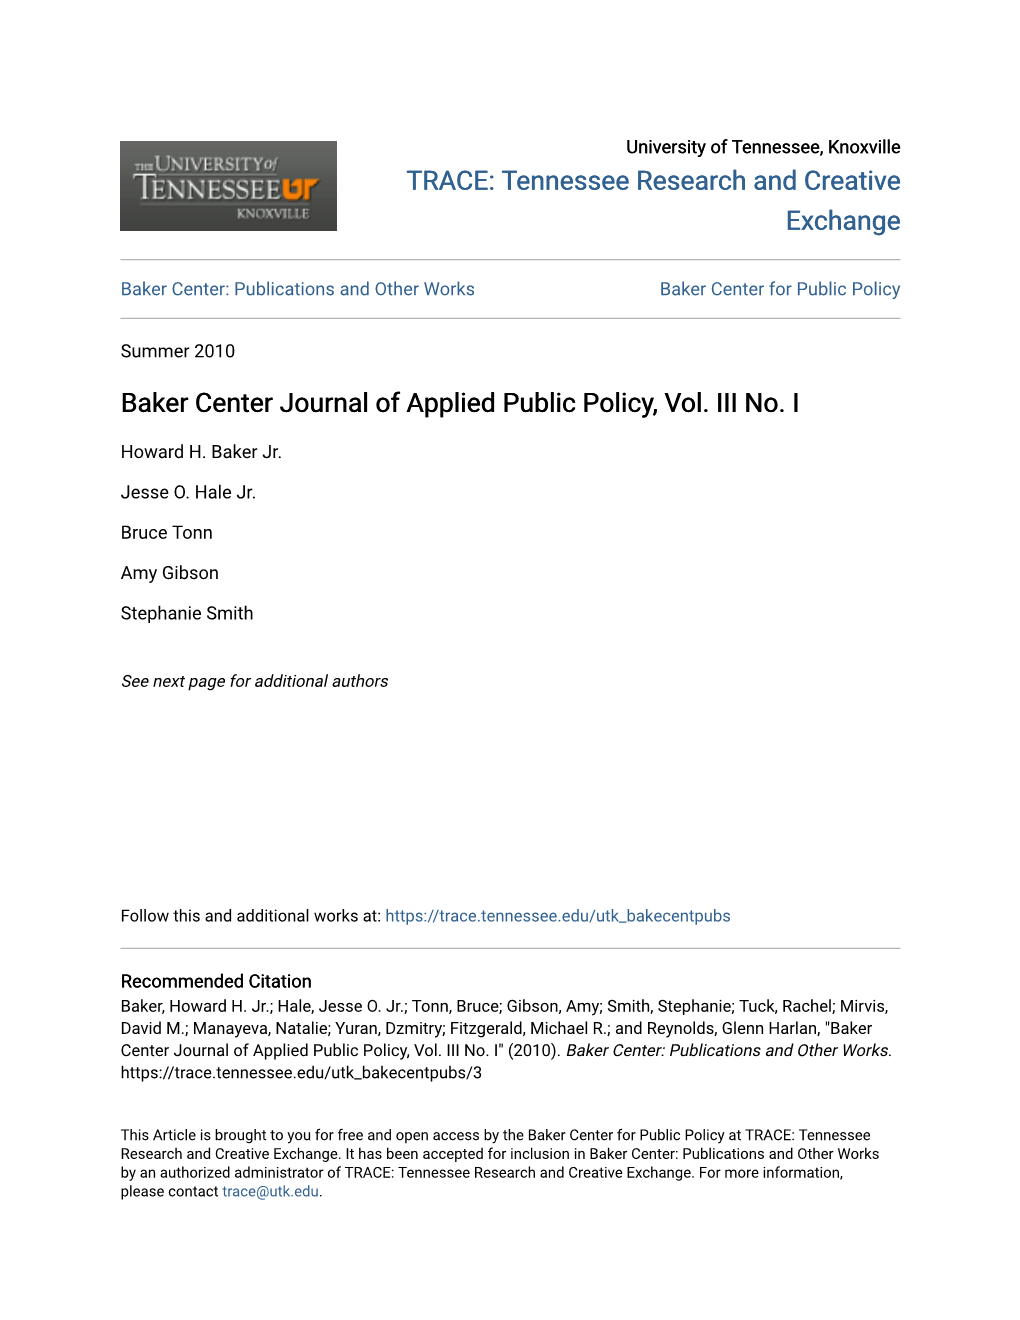 Baker Center Journal of Applied Public Policy, Vol. III No. I